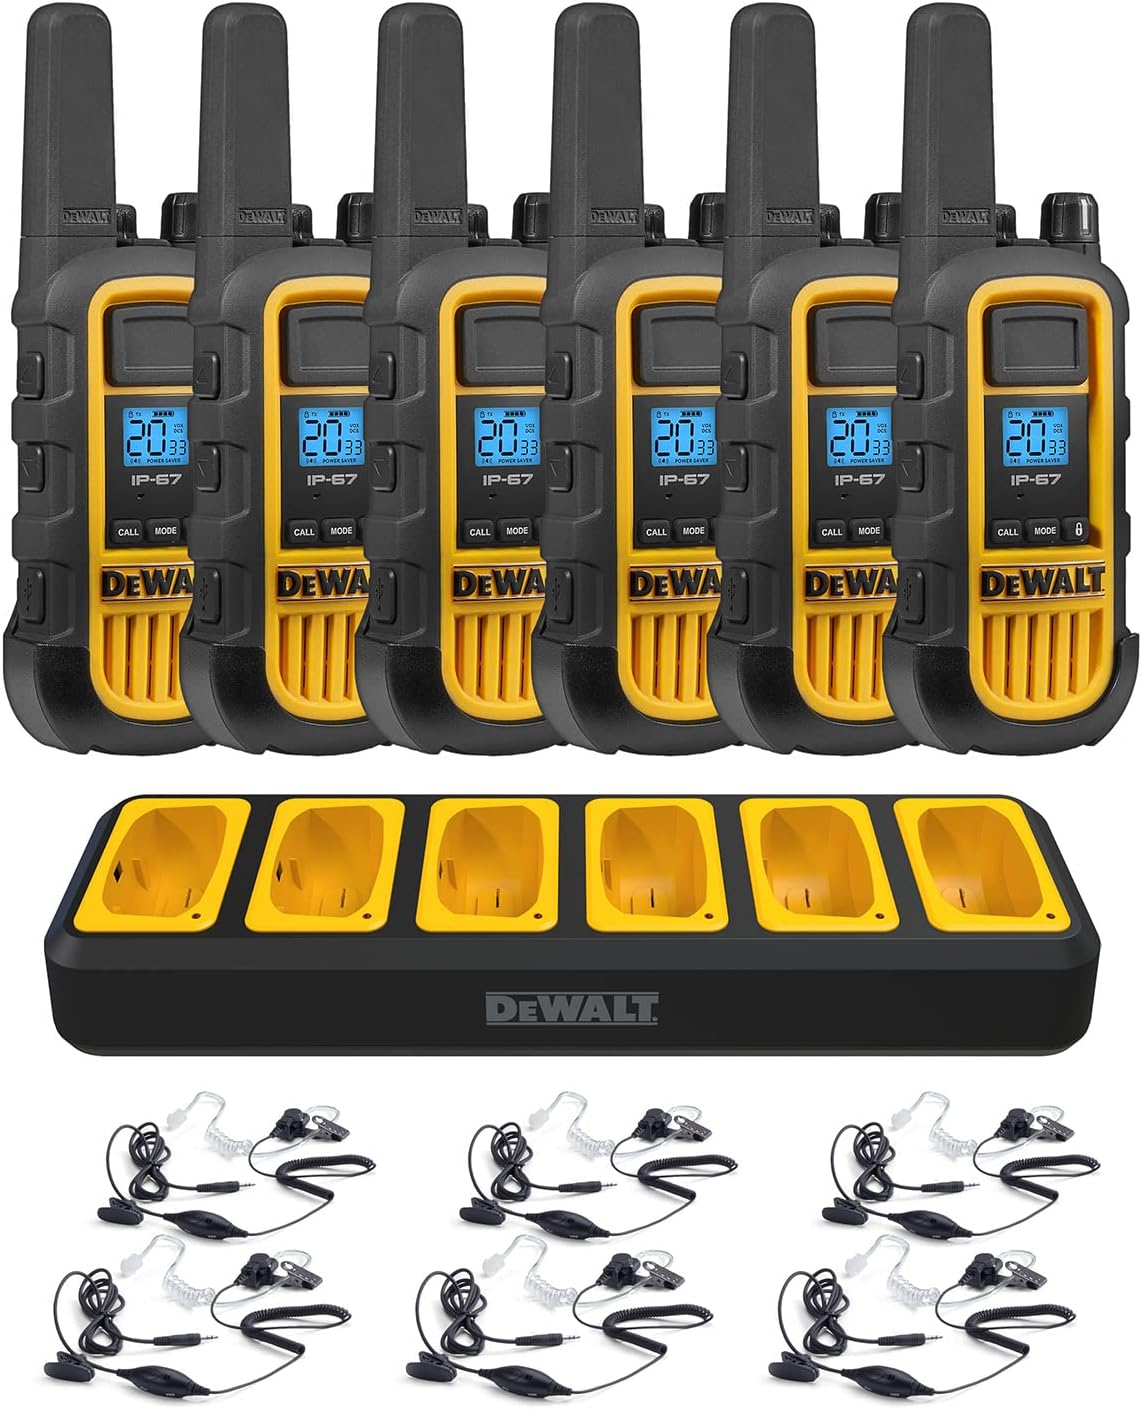 DeWalt DXFRS800 Rechargeable Two-Way Radio with Port Charger and Headset  Bundle Pack Walmart Canada